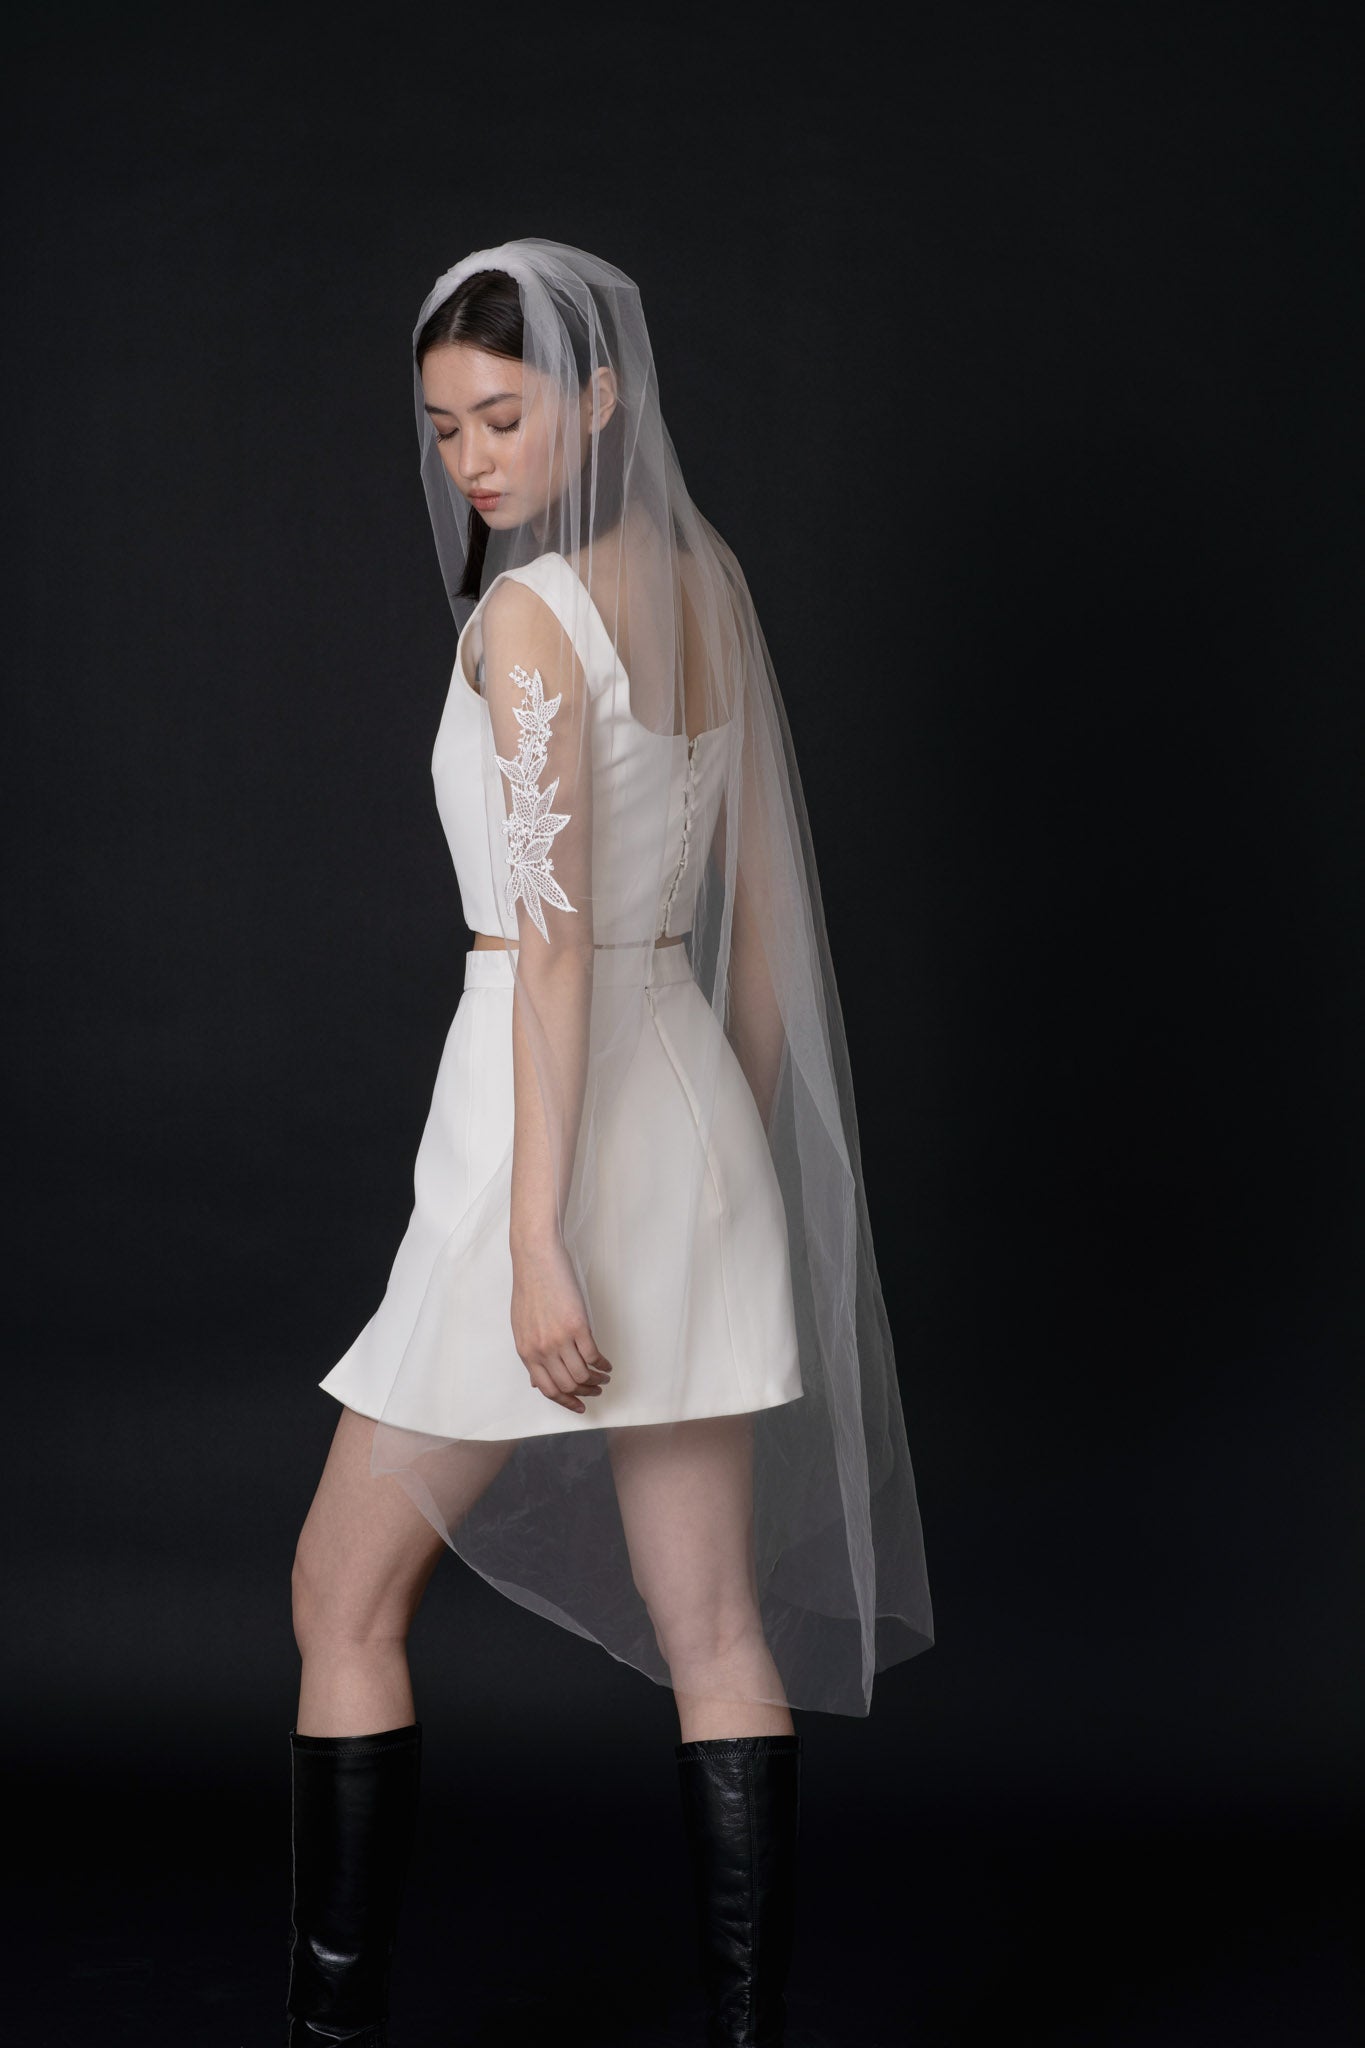 Modern ethereal veil with floating leaf lace applique and soft tulle. Finished with a gold comb. Perfect for a contemporary and romantic bridal look